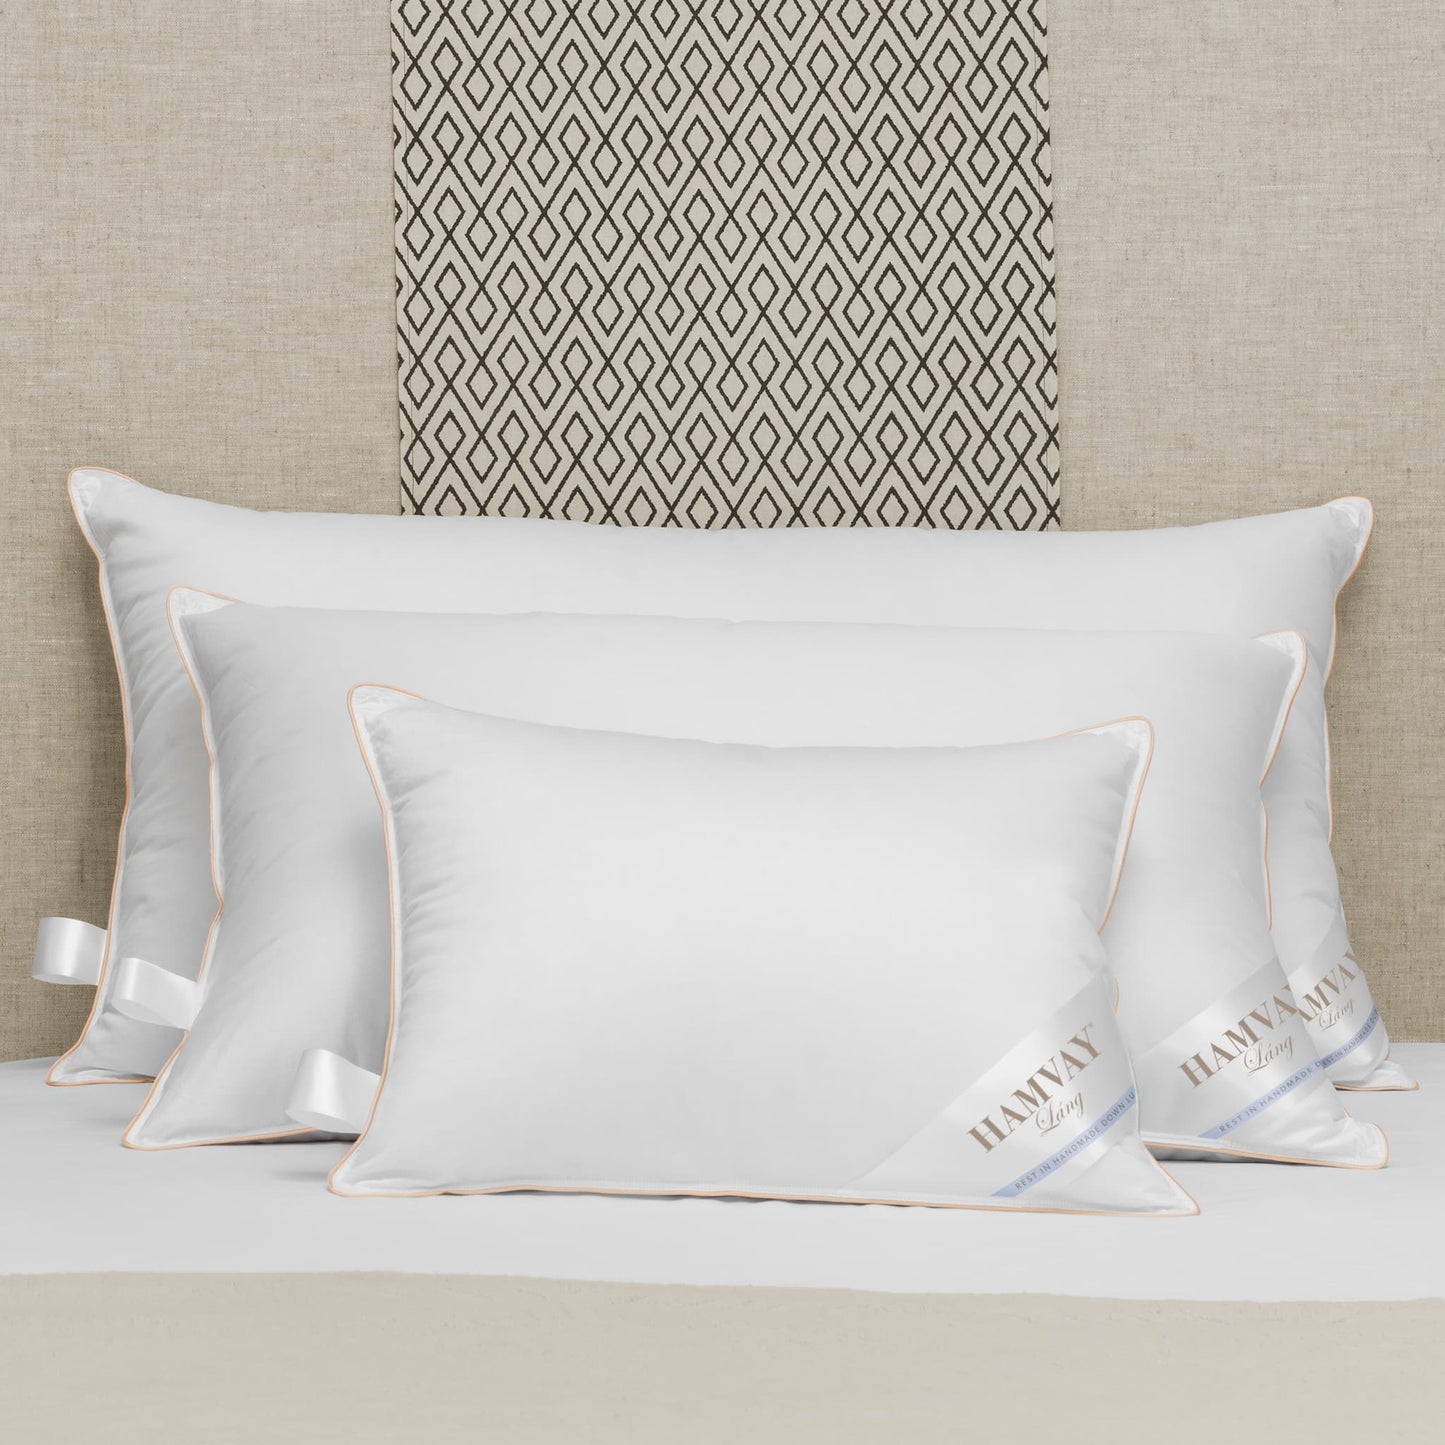 3 sizes of soft luxurious Hungarian goose down pillows on a beige bed